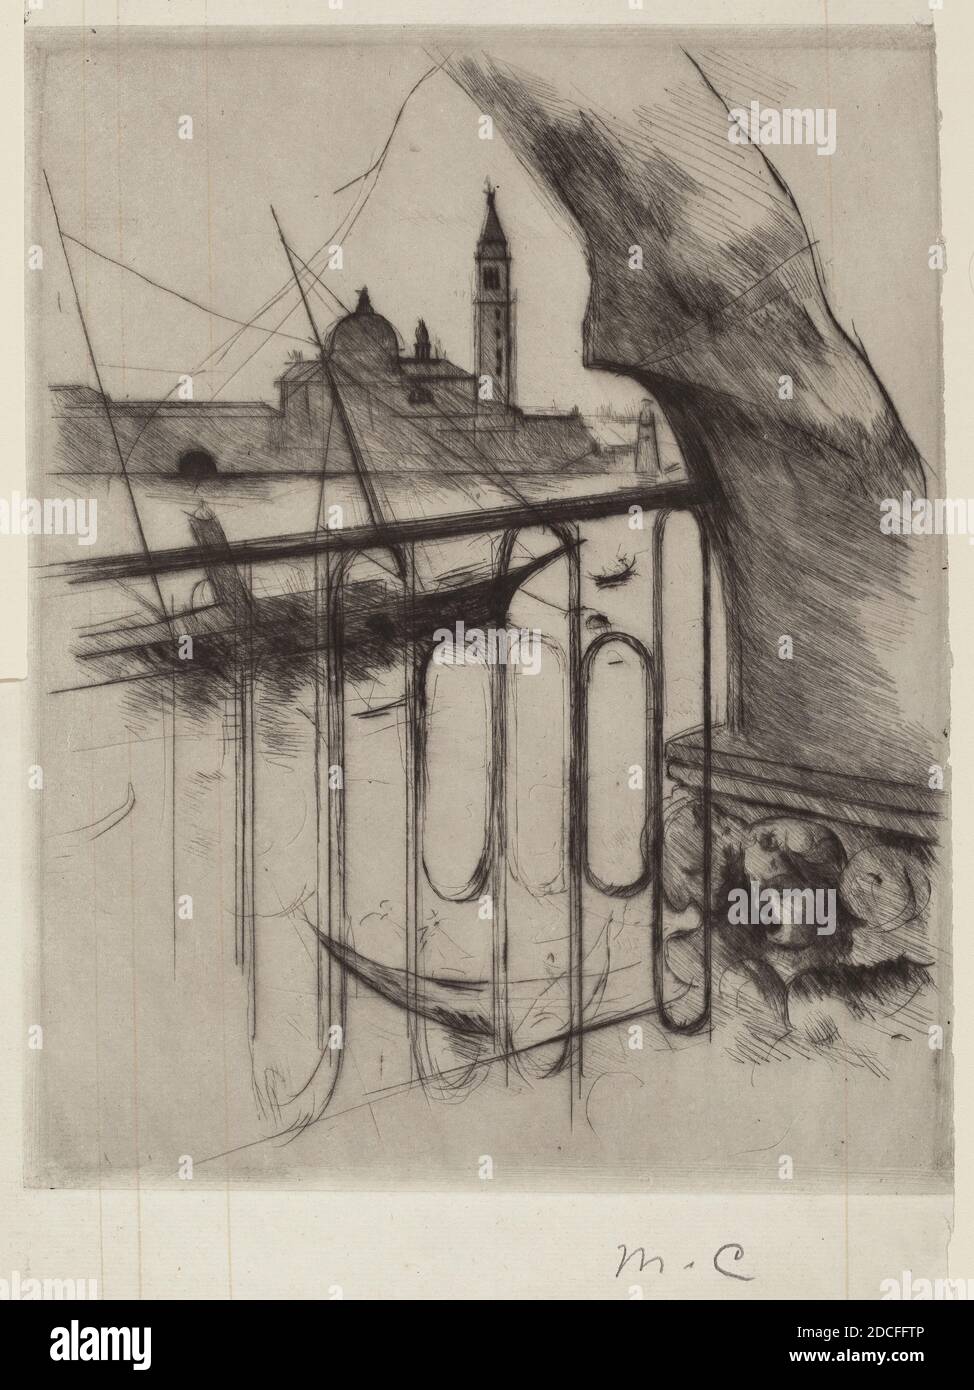 Mary Cassatt, (artist), American, 1844 - 1926, View of Venice, 1887, drypoint in black, plate: 26.67 × 21.59 cm (10 1/2 × 8 1/2 in Stock Photo